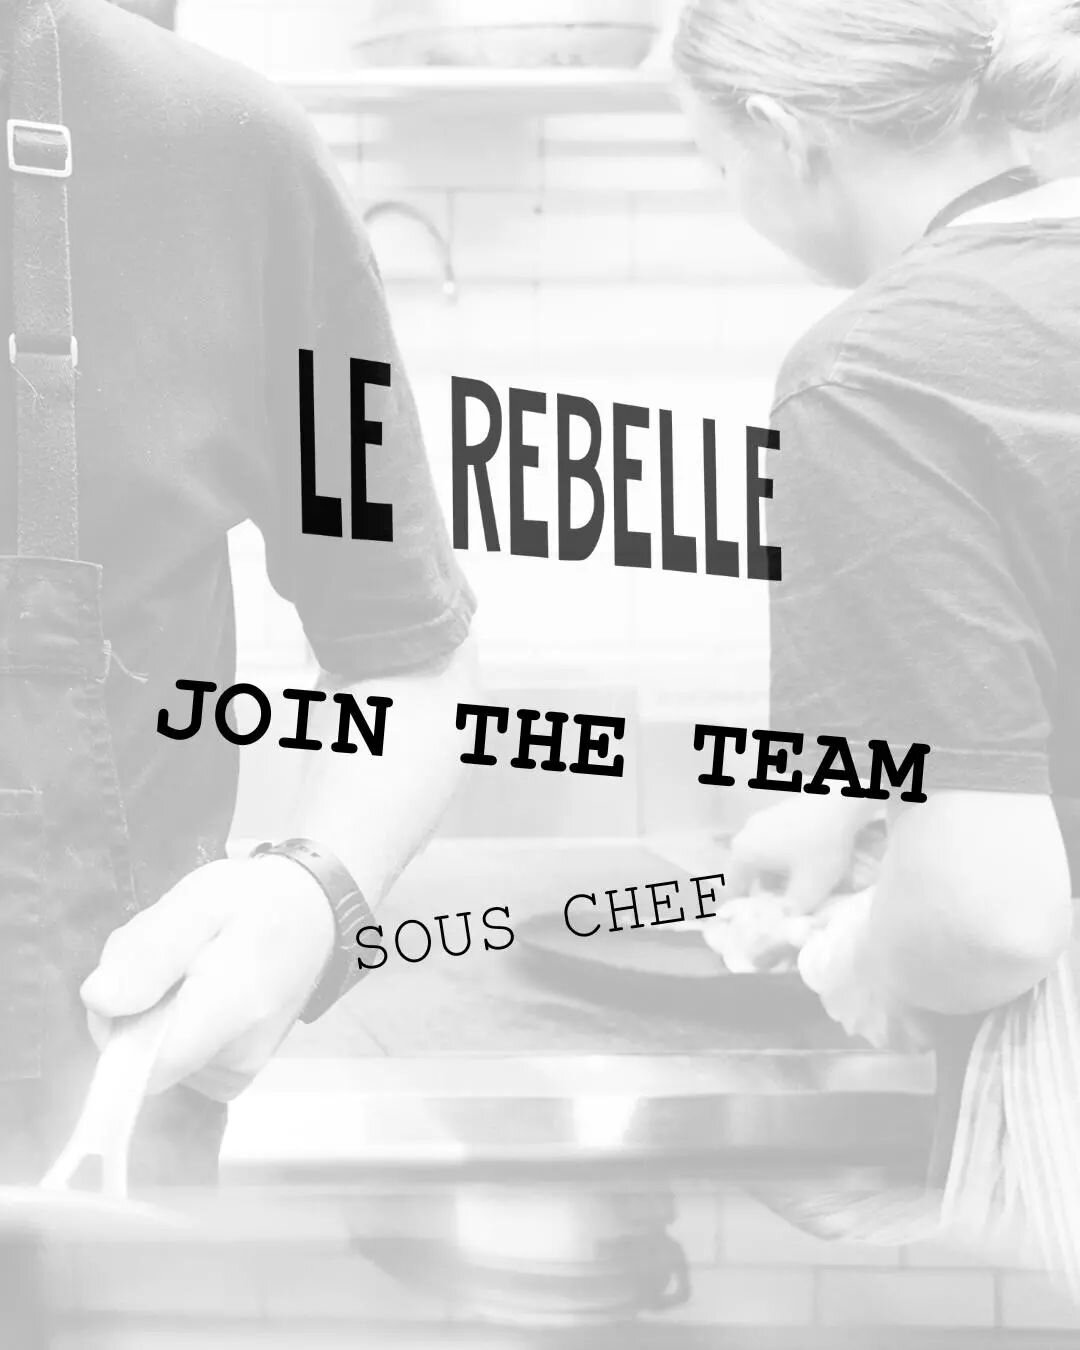 Le Rebelle has a rare and exciting opportunity for a Sous Chef to join our team!

Hit the link in bio to find out more about the role. 

Please send your CV along with a little note about yourself to chef@lerebelle.com.au.